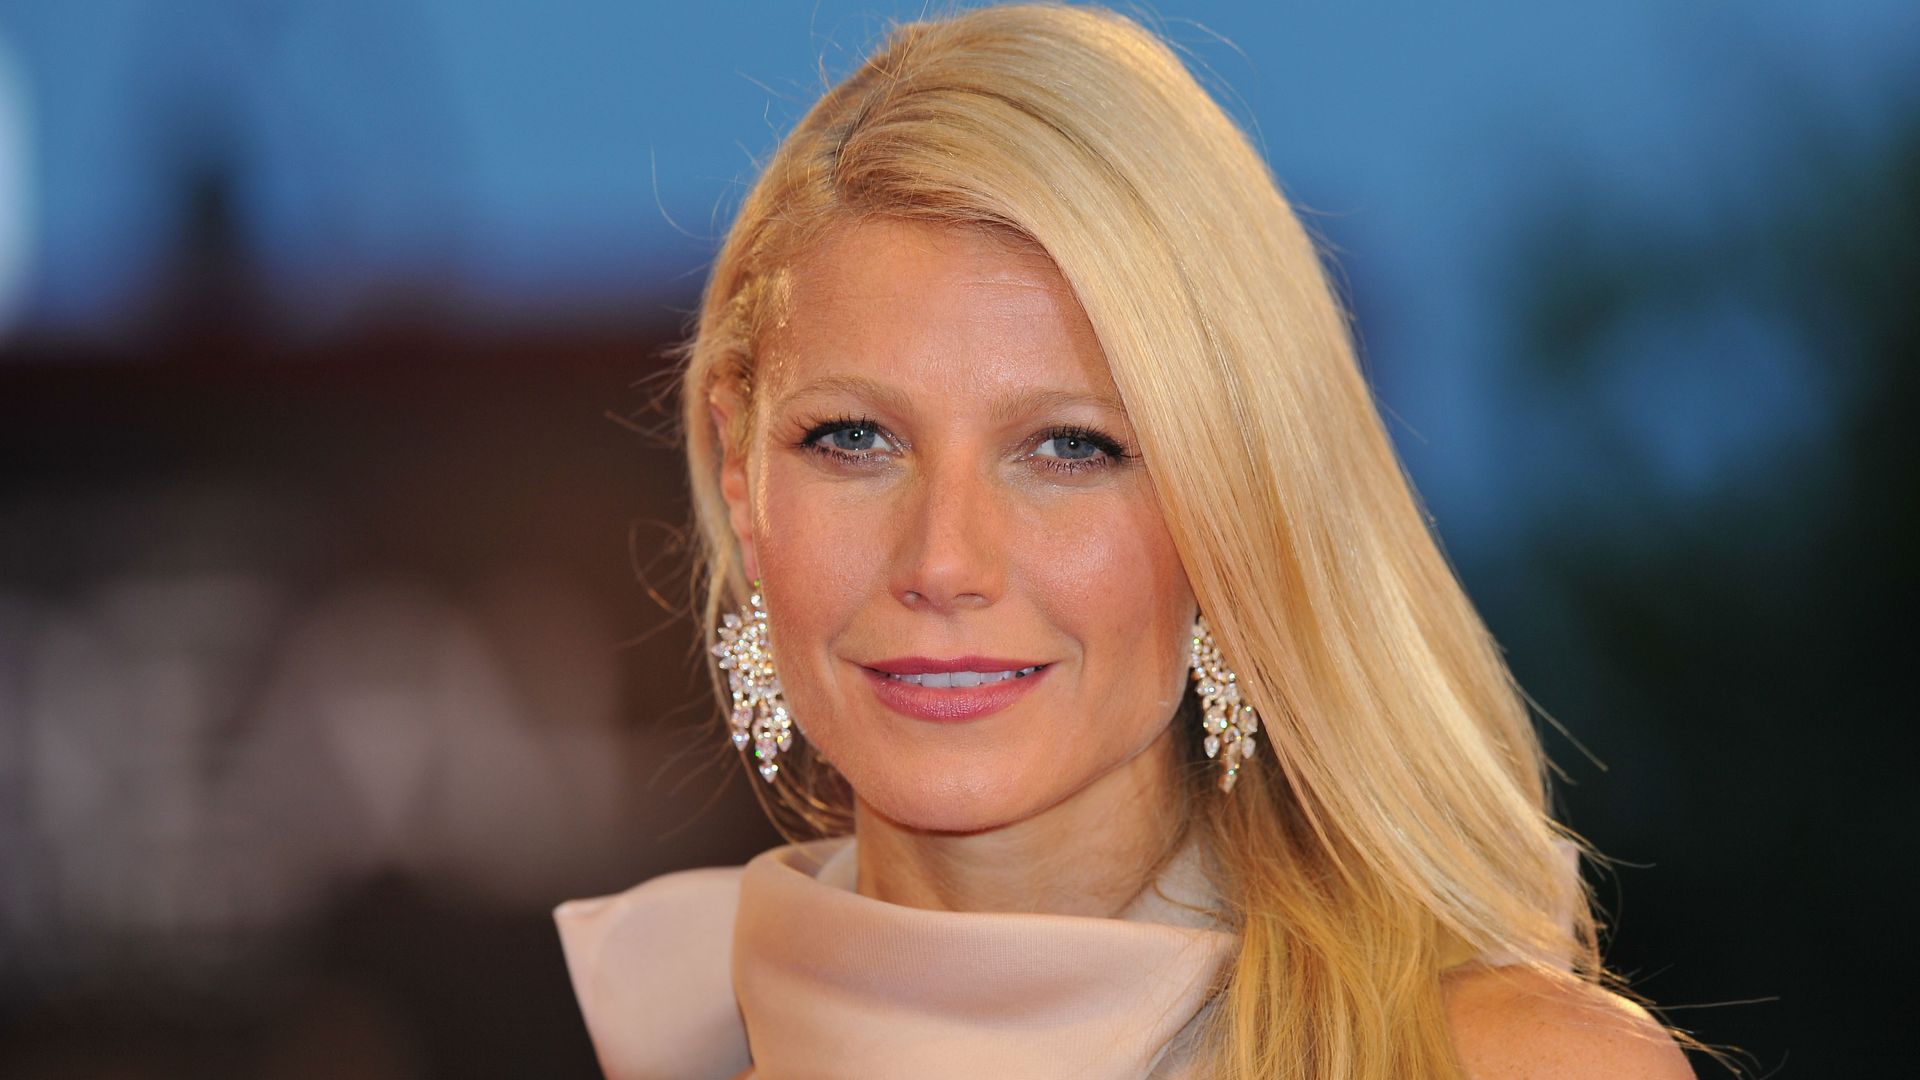 Gwyneth Paltrow's son Moses is officially 18! 'You absolutely kill me,' says proud mom in emotional tribute